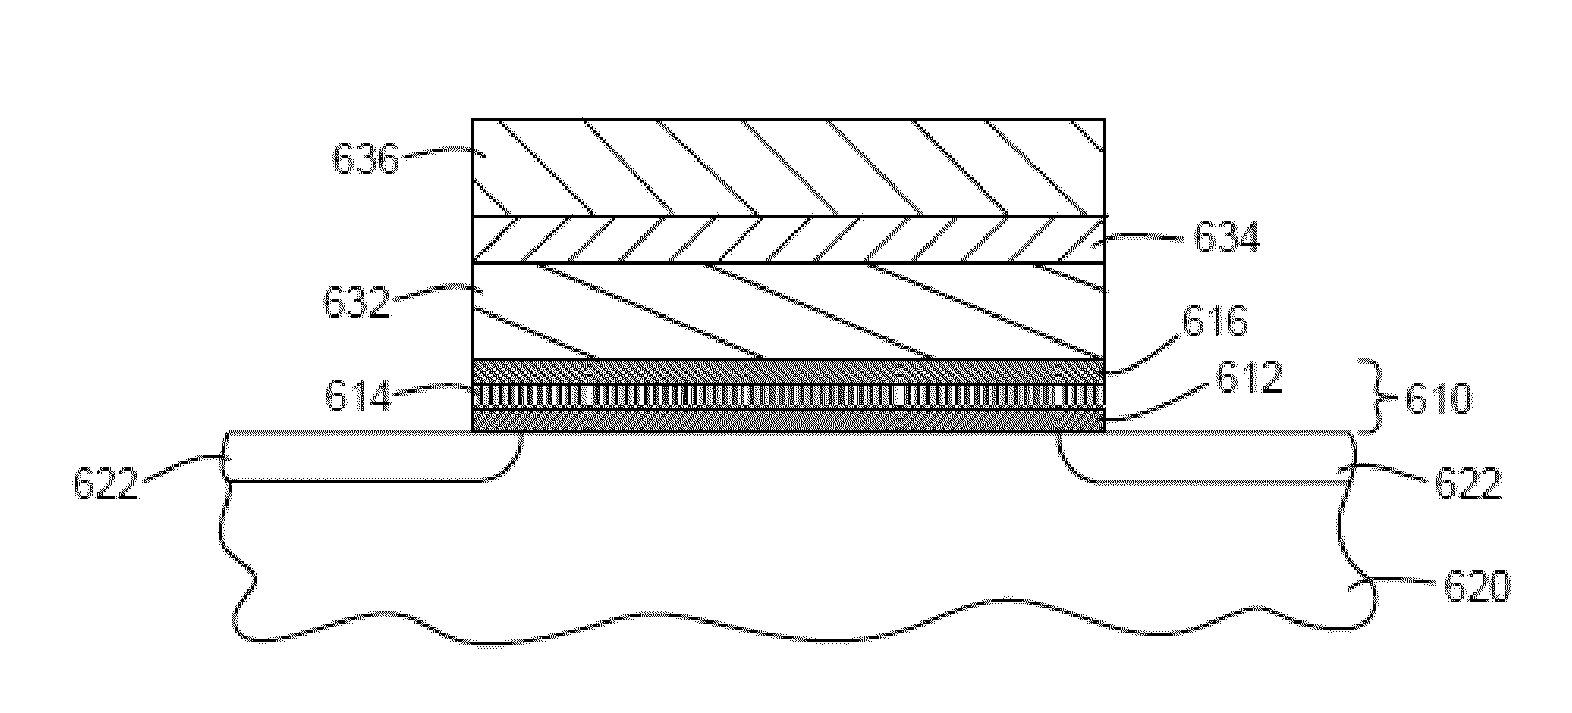 Nonvolatile flash memory structures including fullerene molecules and methods for manufacturing the same